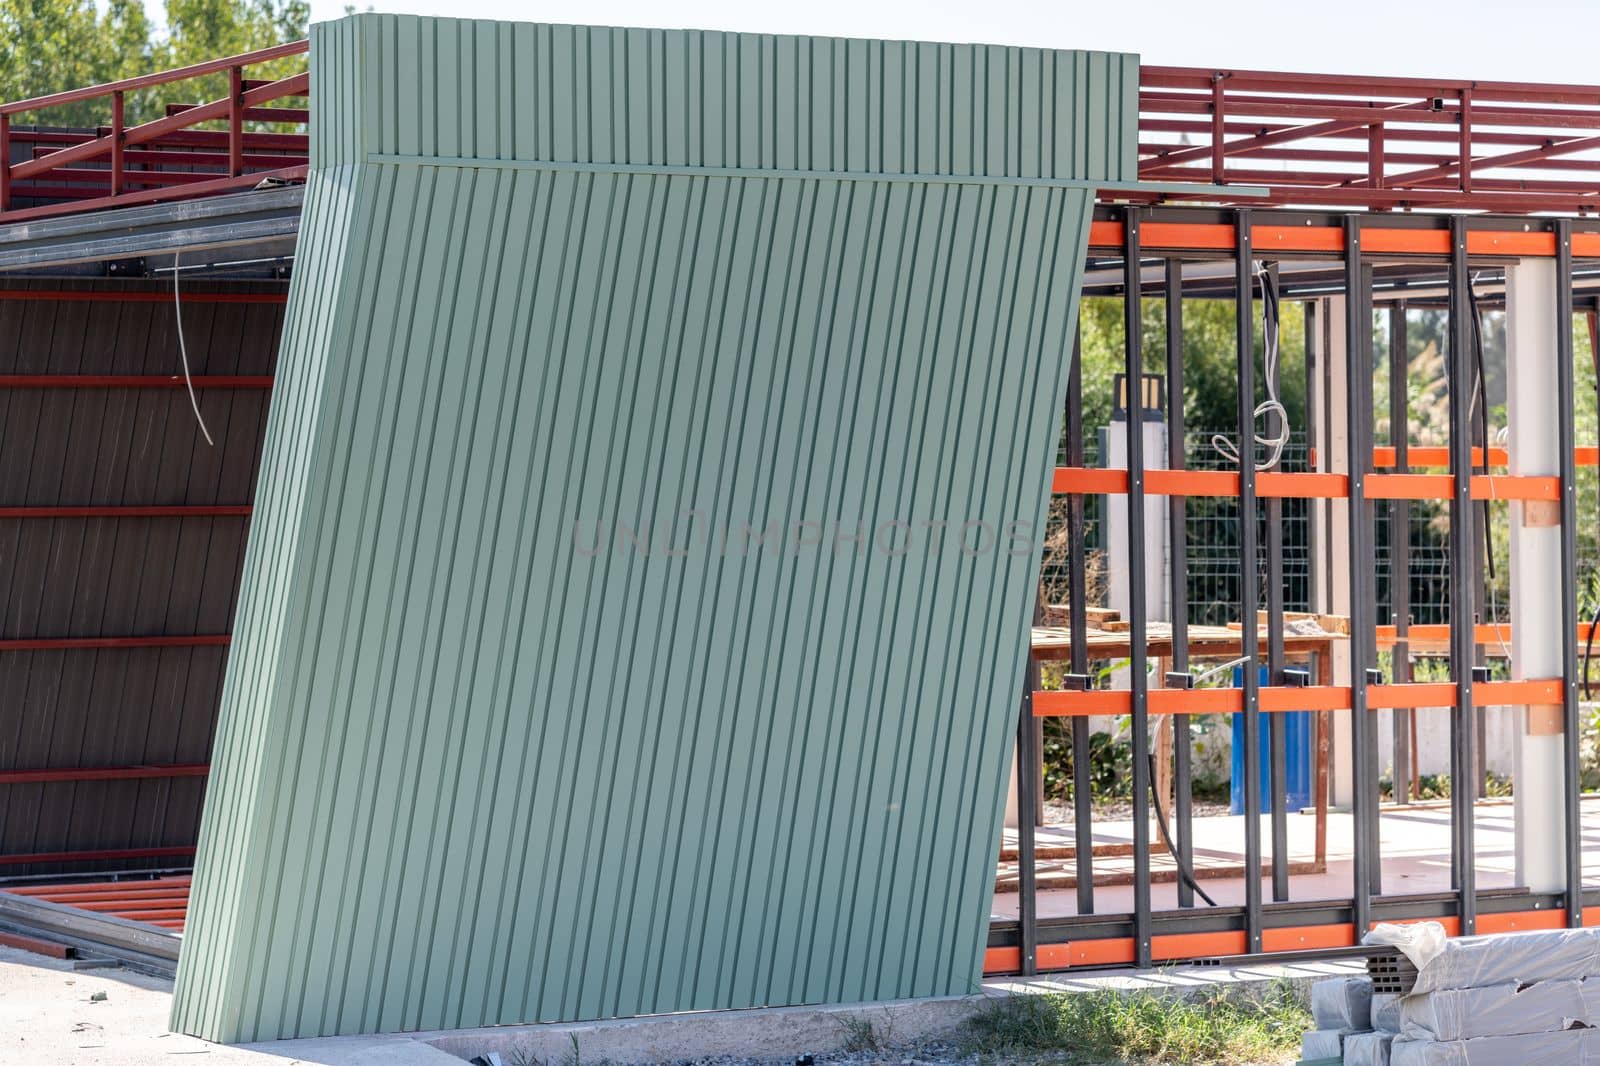 Newly built metal framed building with siding. Construction of a new tiny house. selective focus by Sonat